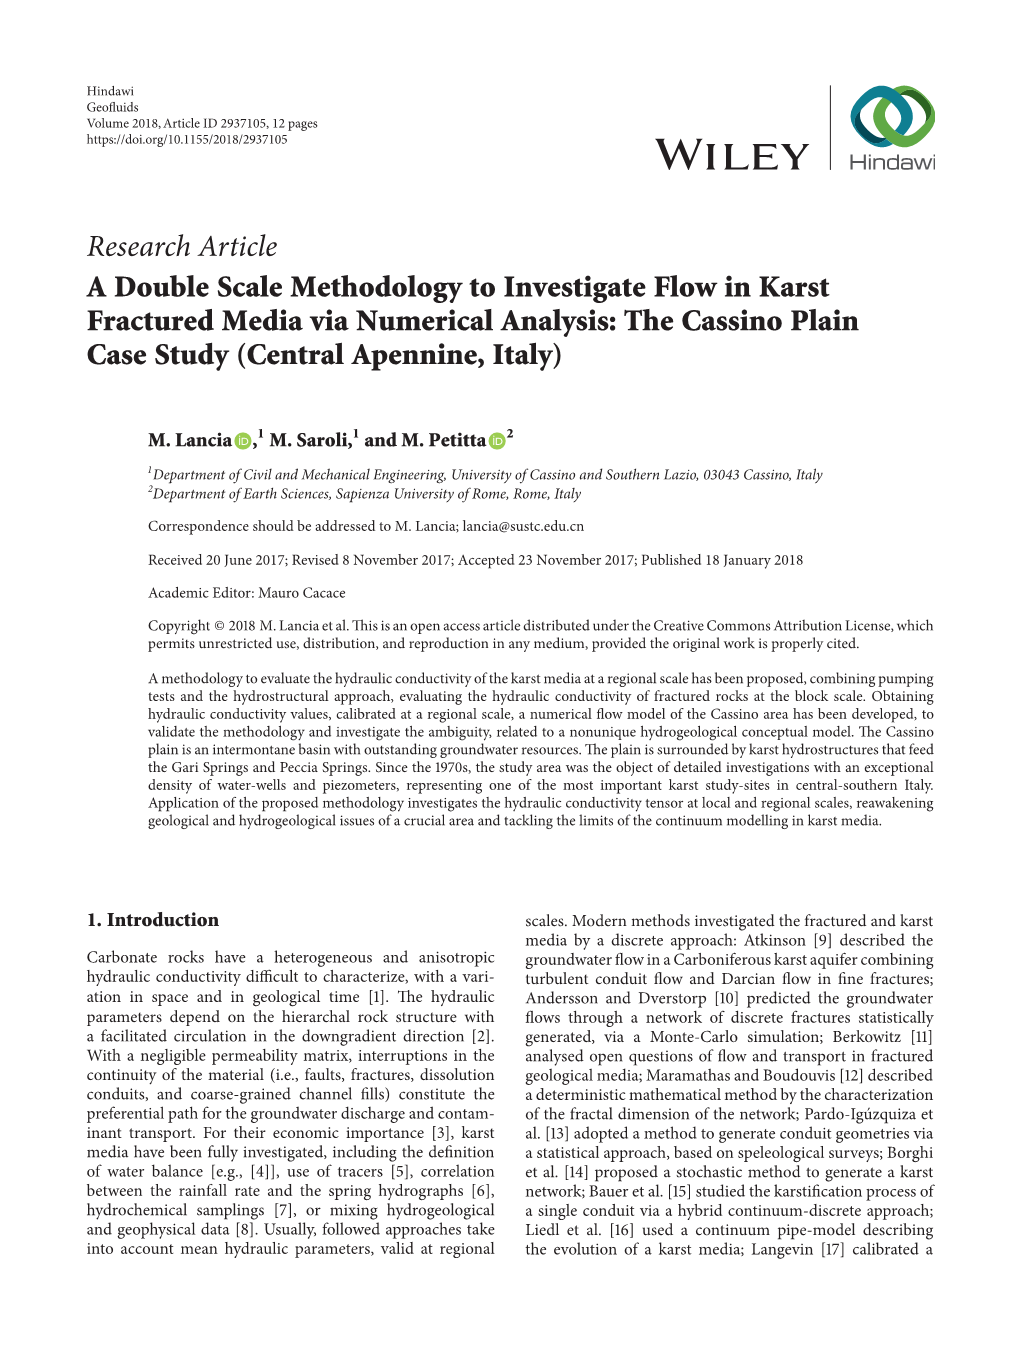 Research Article a Double Scale Methodology to Investigate